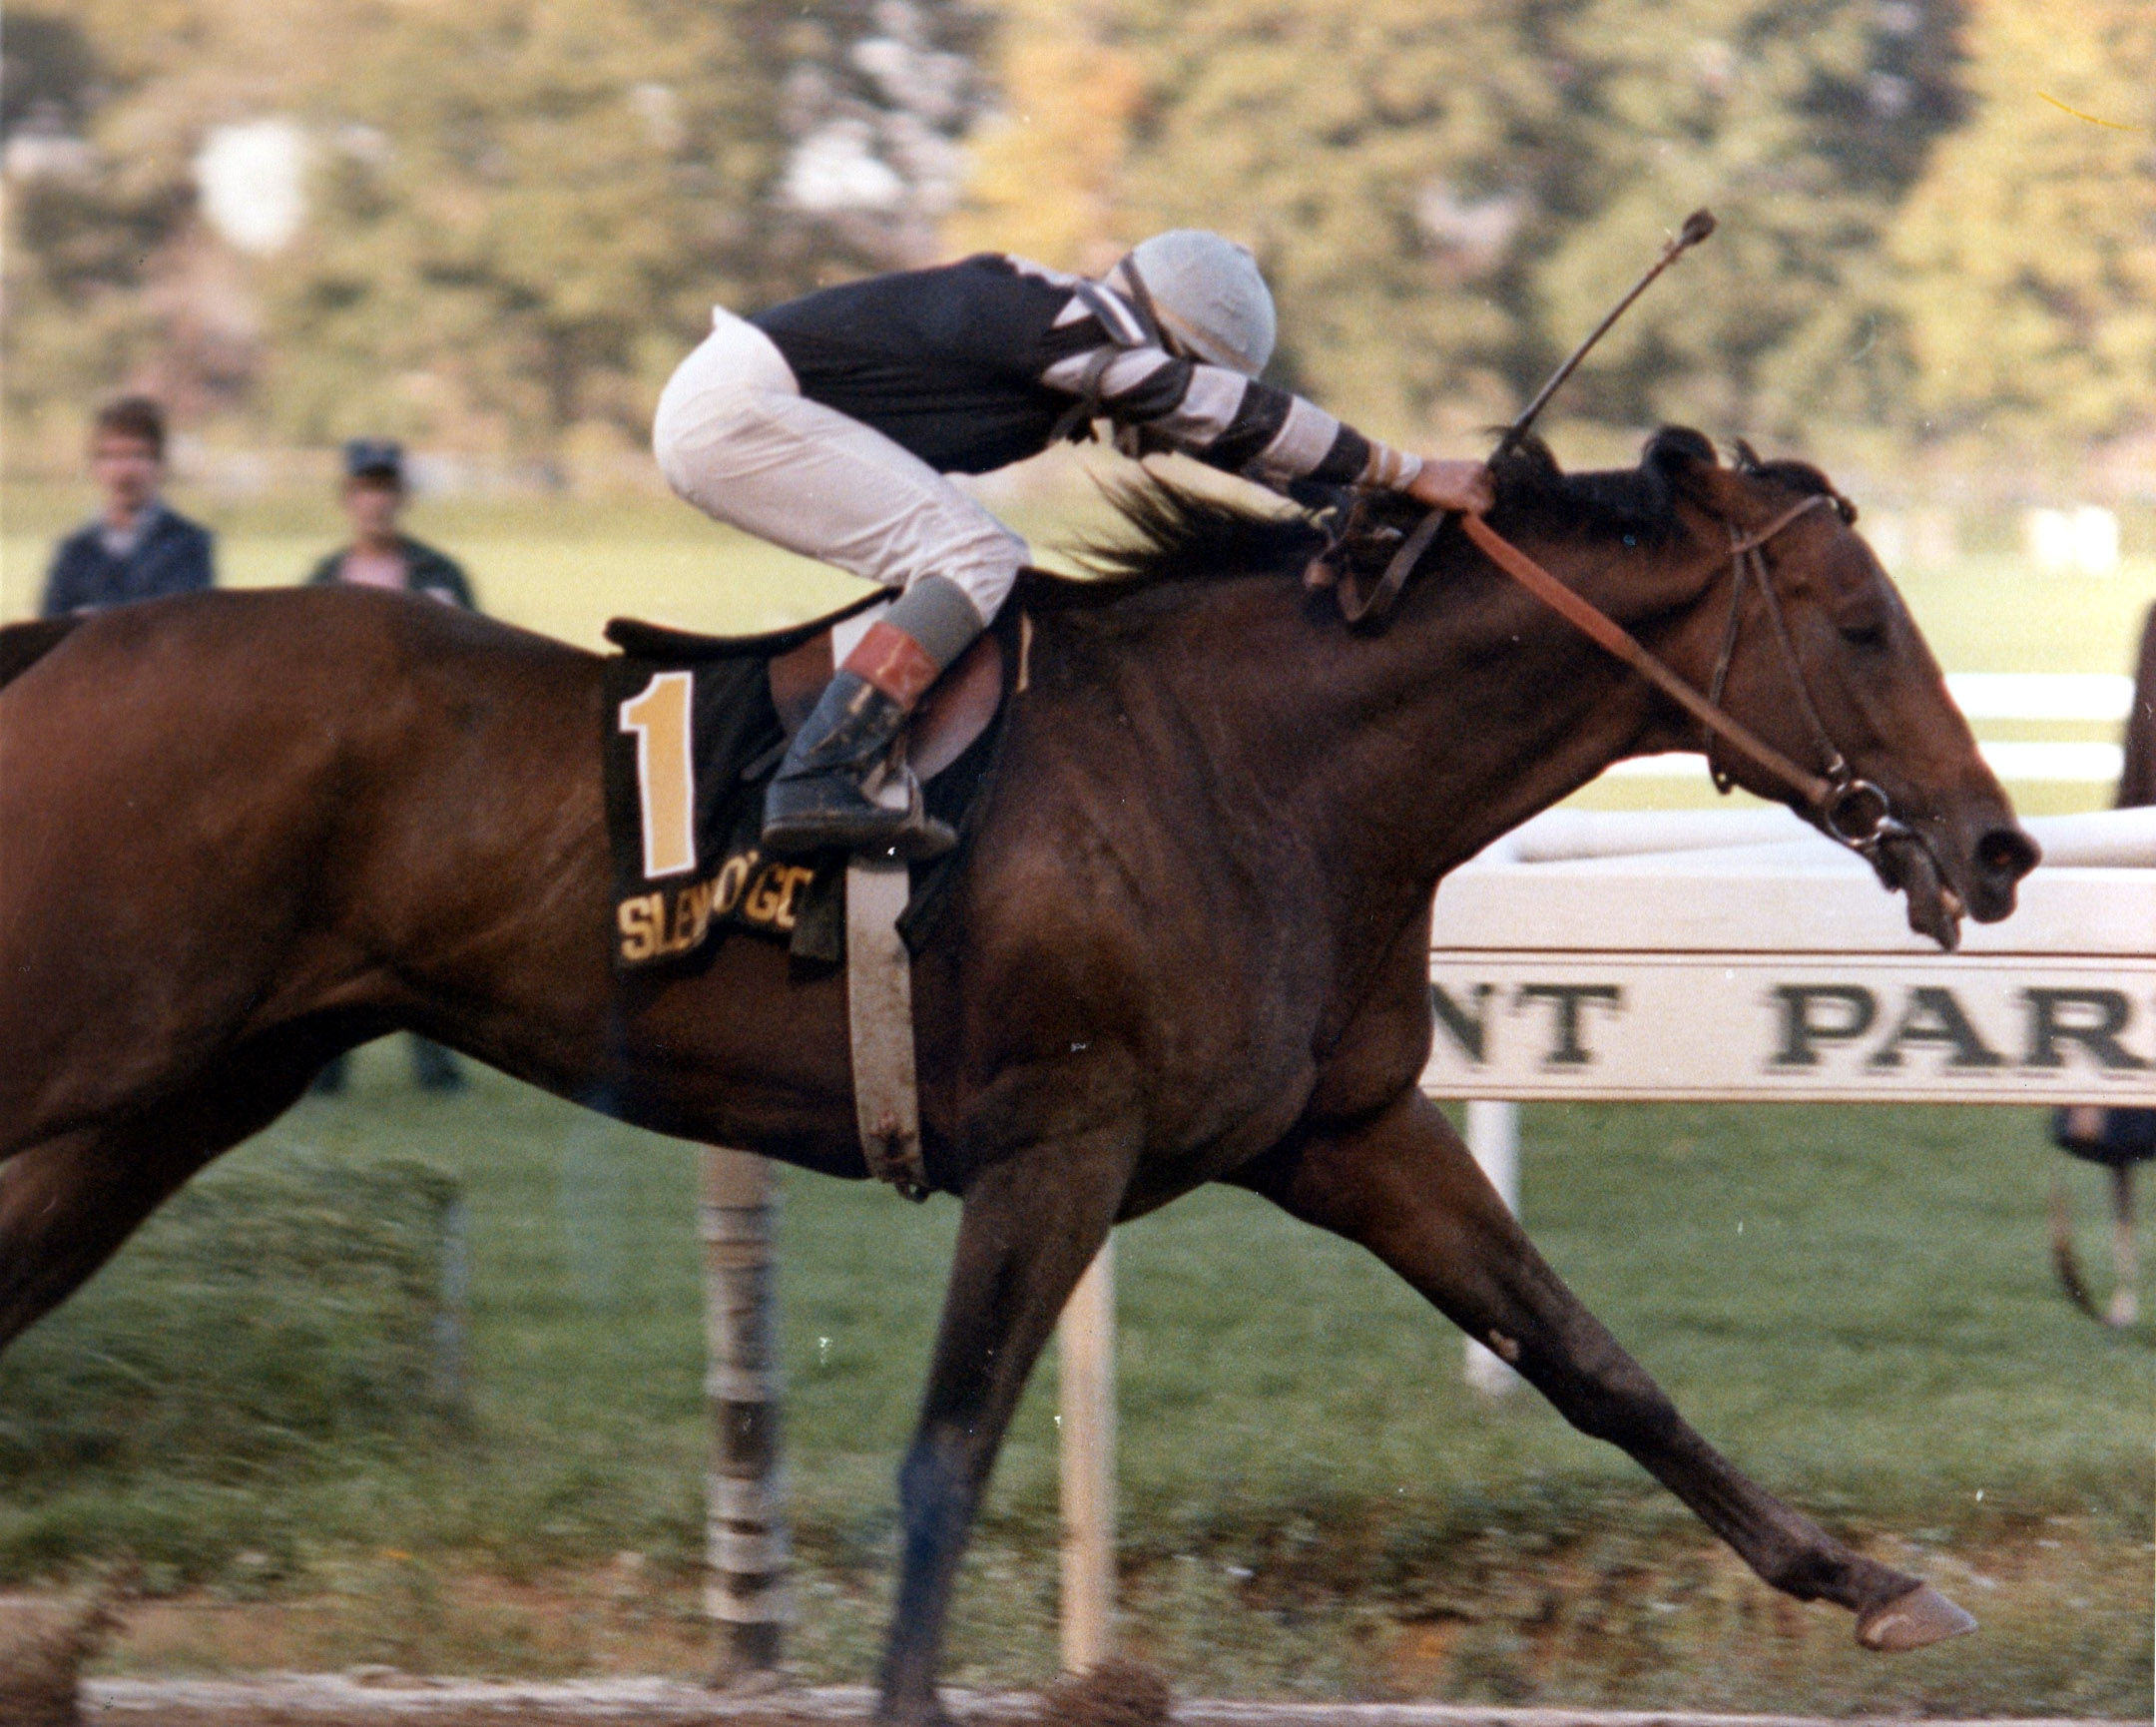 Slew o' Gold with Angel Cordero, Jr. up at Belmont Park (Museum Collection)